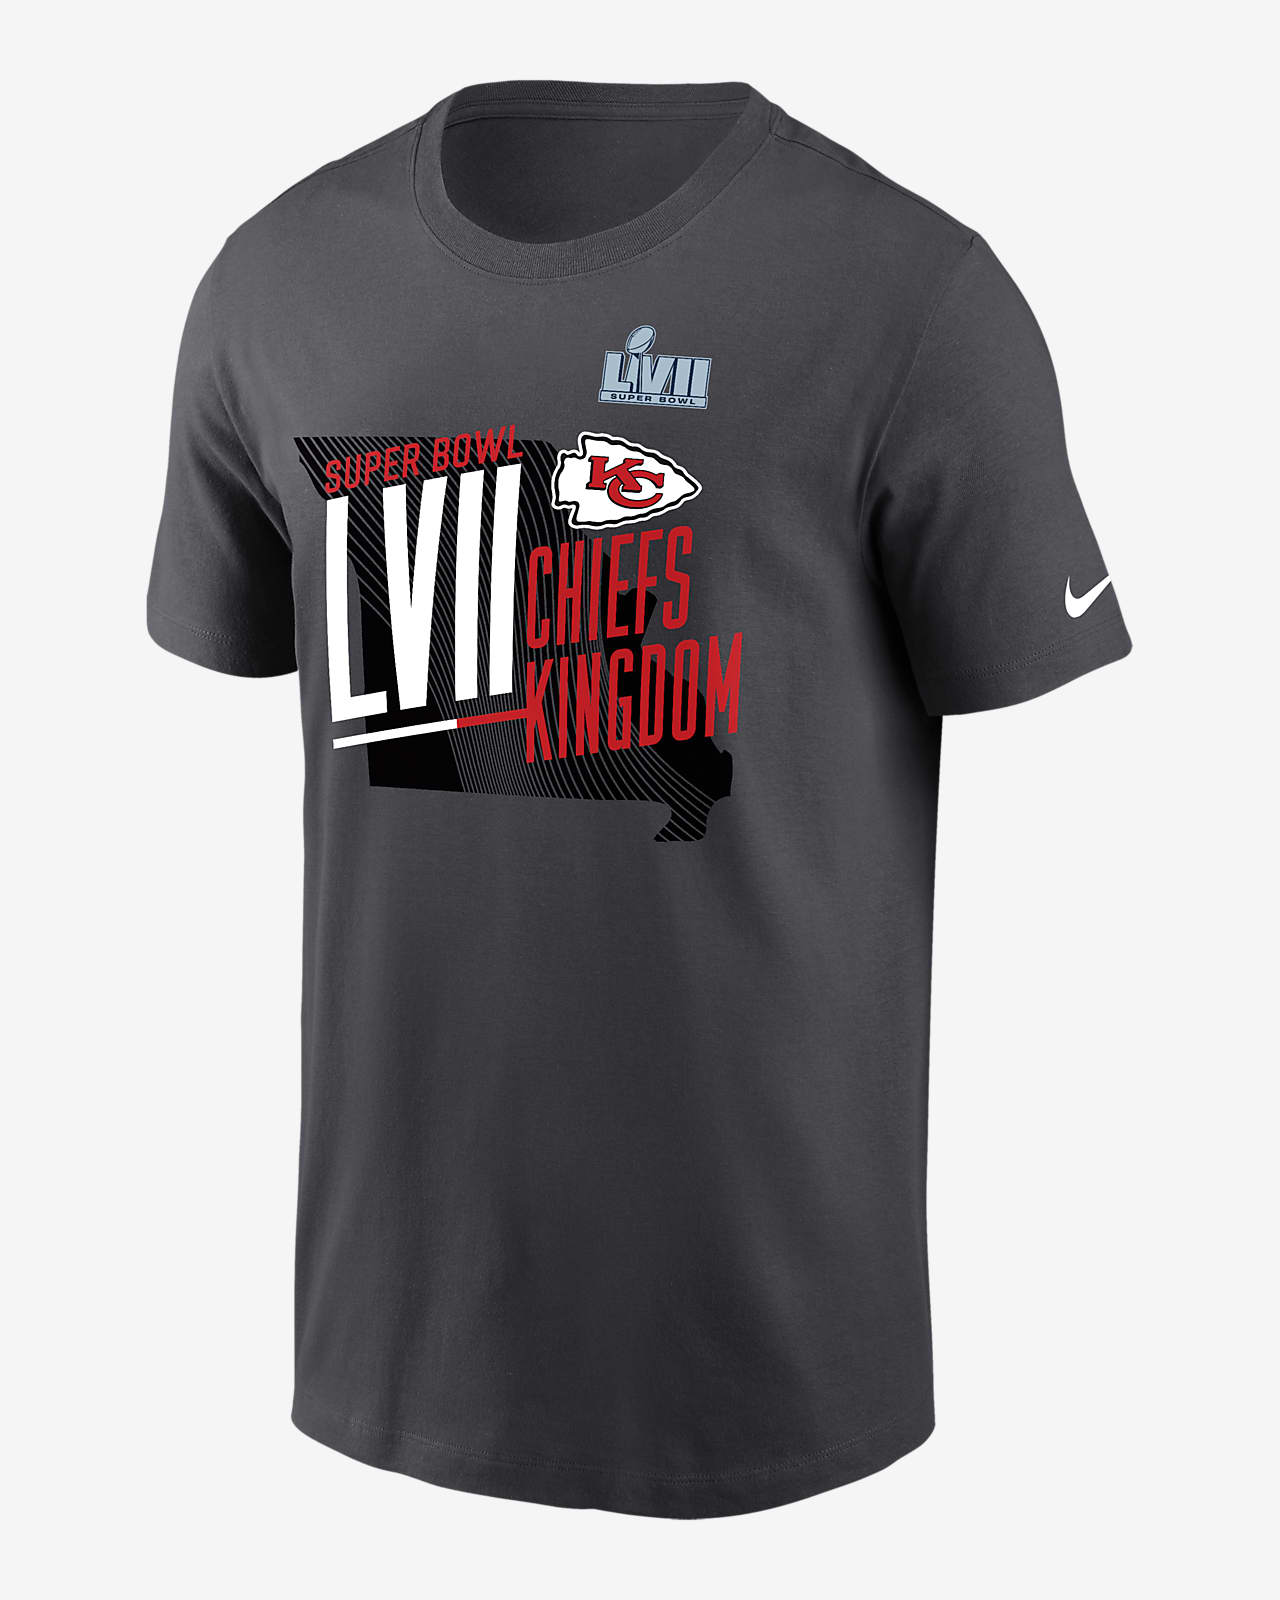 Be the MVP of style with these Super Bowl inspired t-shirts